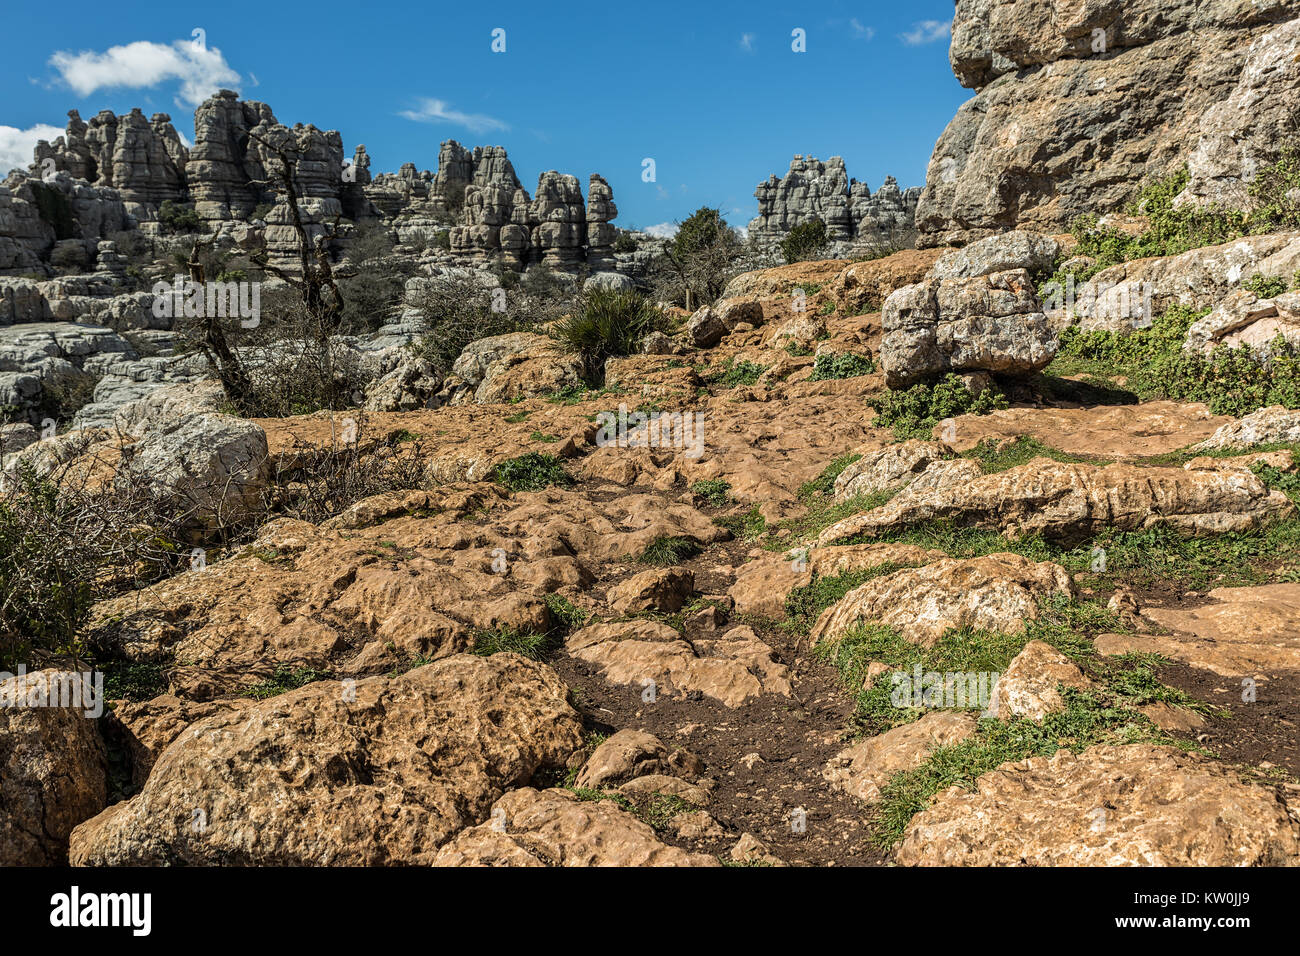 The Torcal de Antequera Natural Park contains one of the most impressive examples of karst landscape in Europe. This natural park is located near Ante Stock Photo